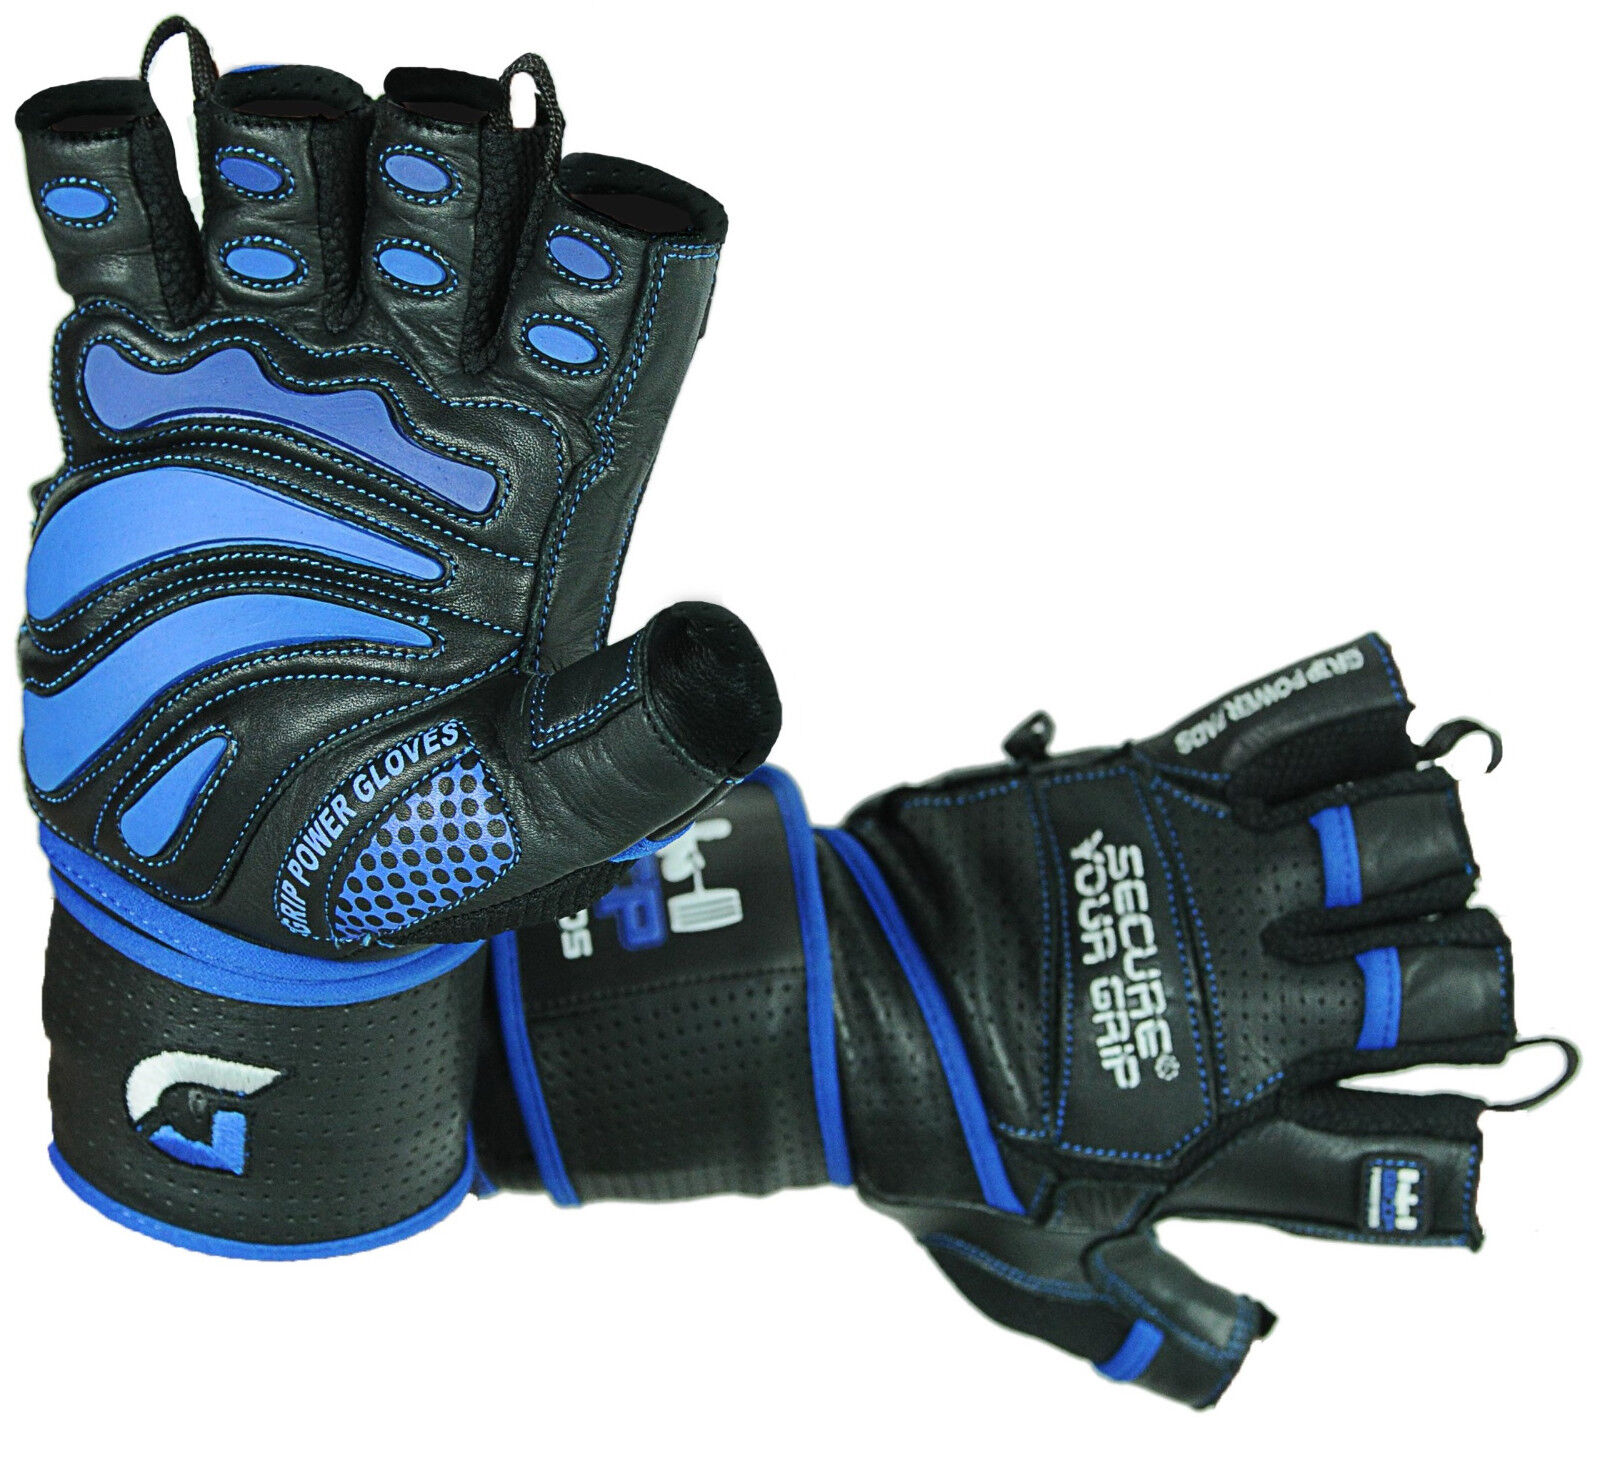 Weight Lifting Gloves for Gym Bodybuilding Training